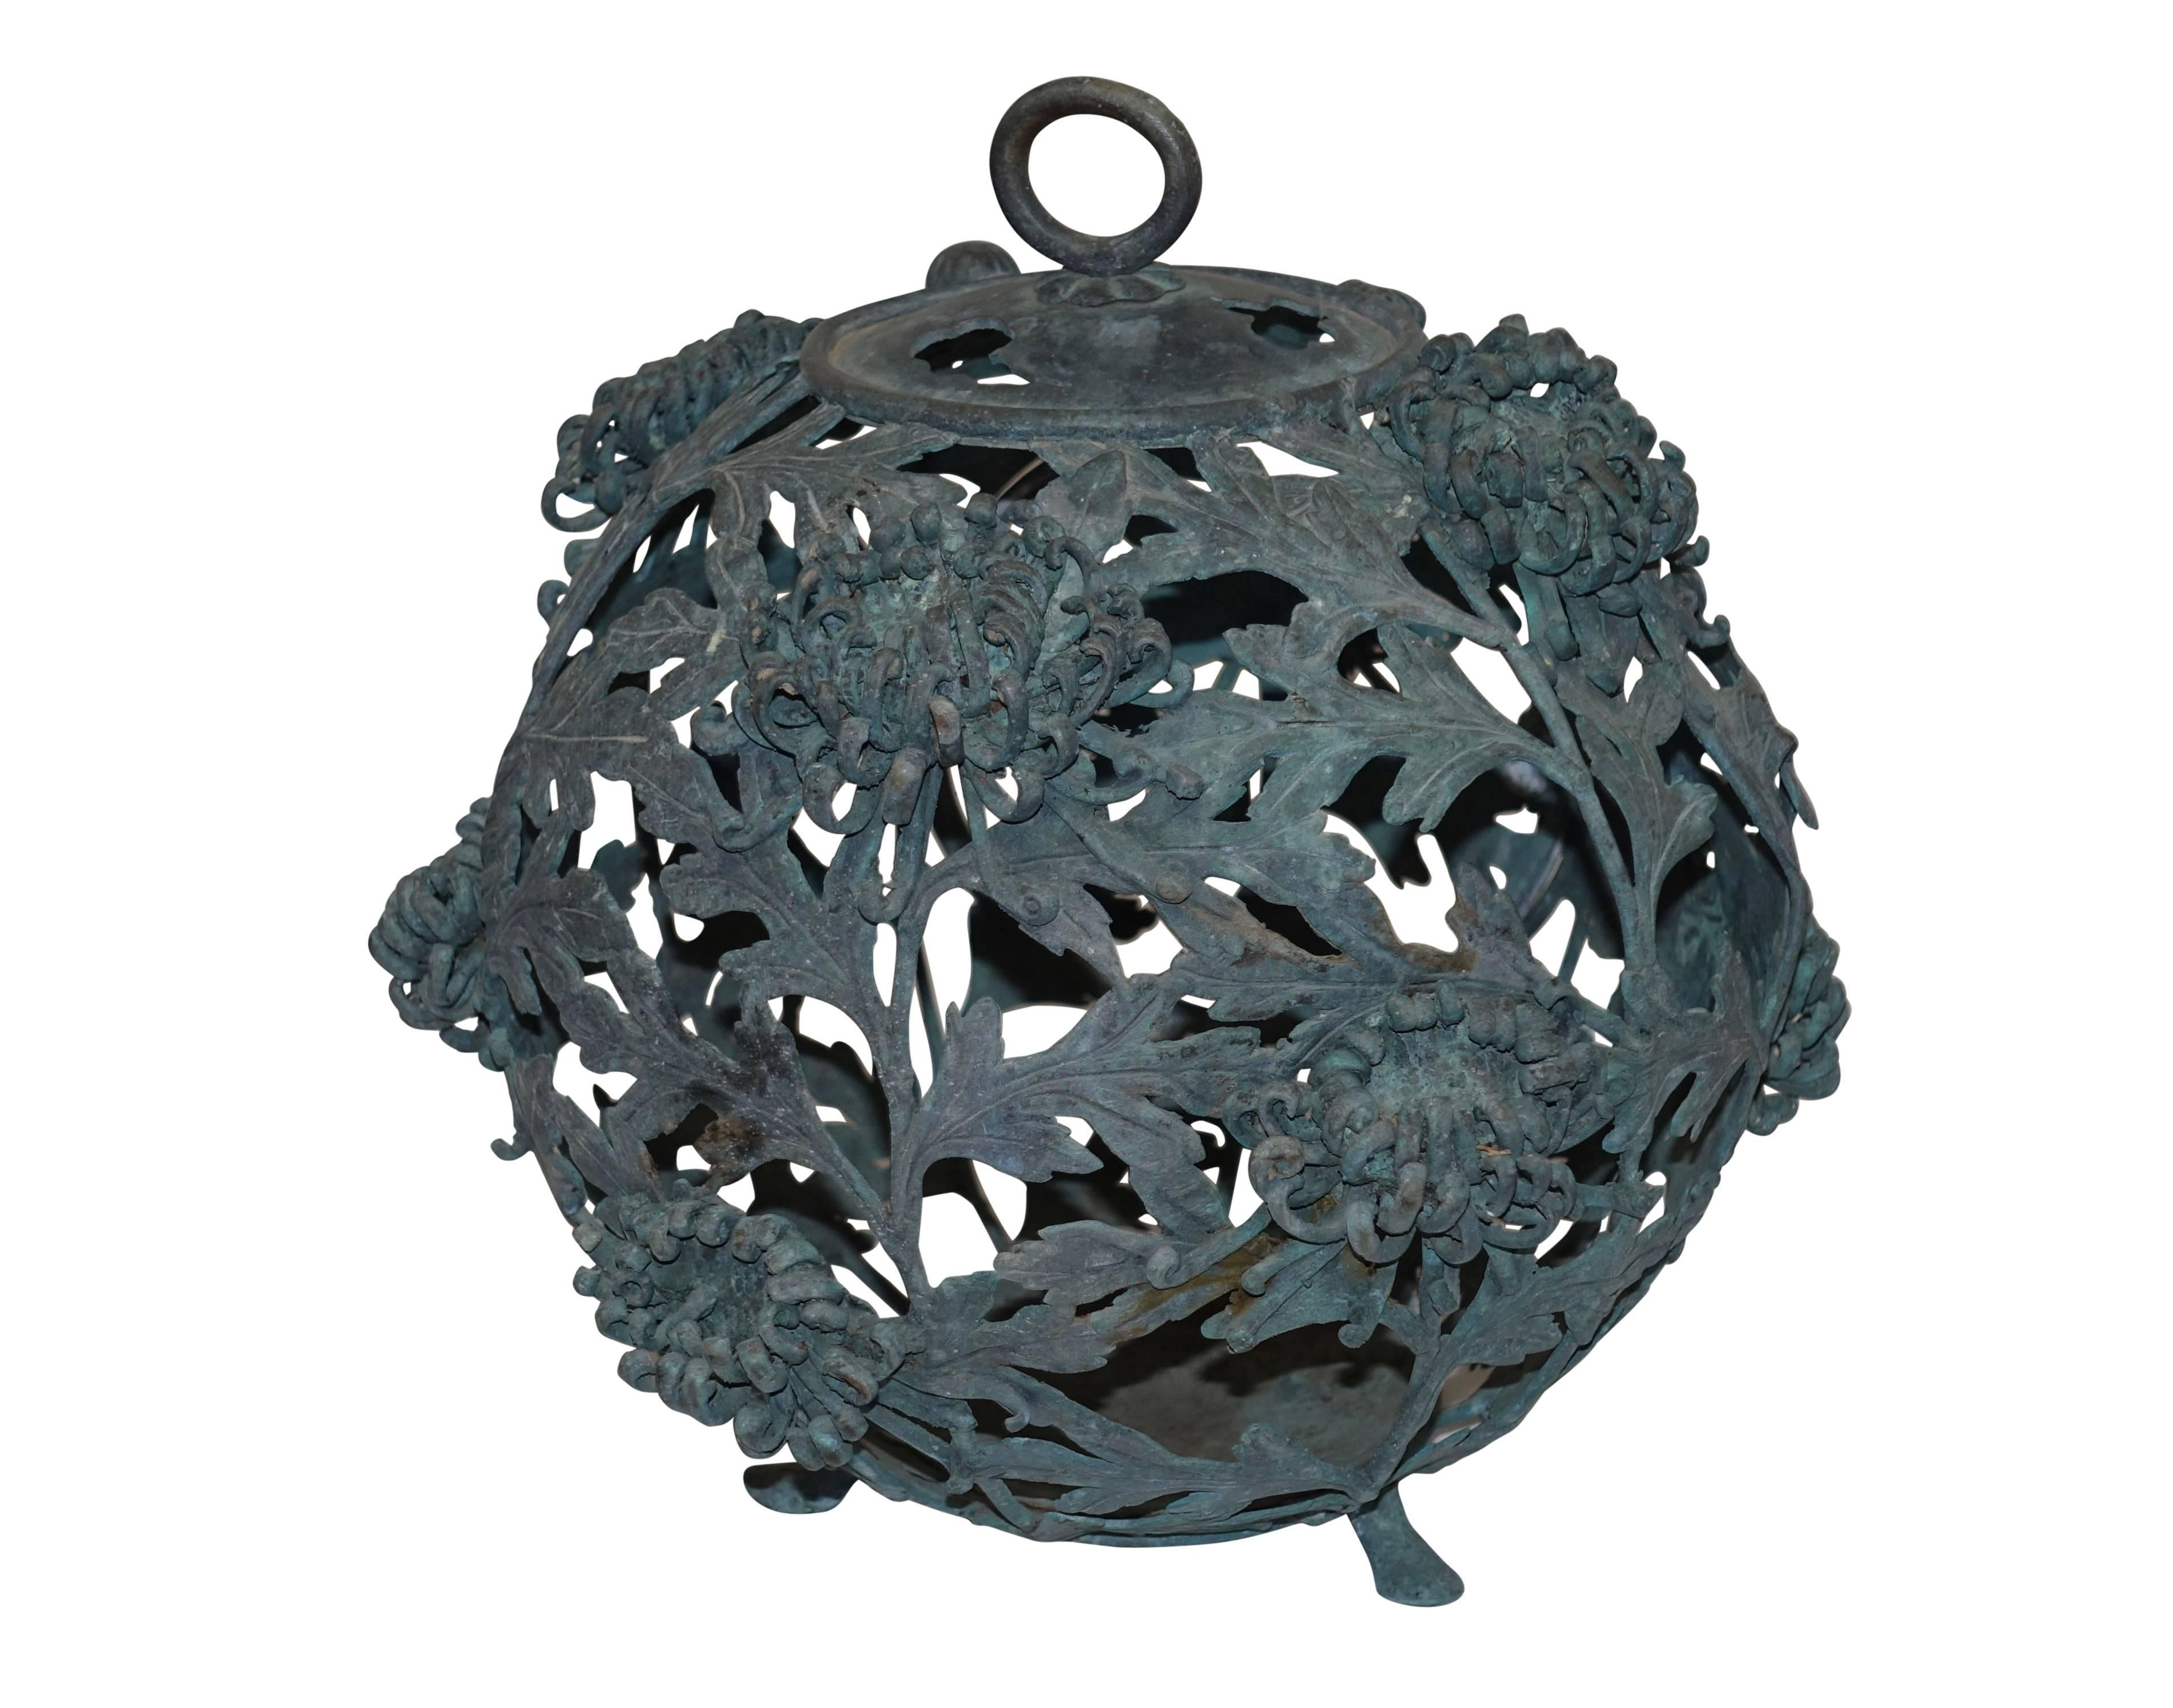 Wonderfully unique bronze hanging garden lantern in spherical shape with blooming chrysanthemum flowers, ring handle for hanging, and sitting on pad feet. Has a charming chrysanthemum bud knob for opening the cage door. Signed by artist on the